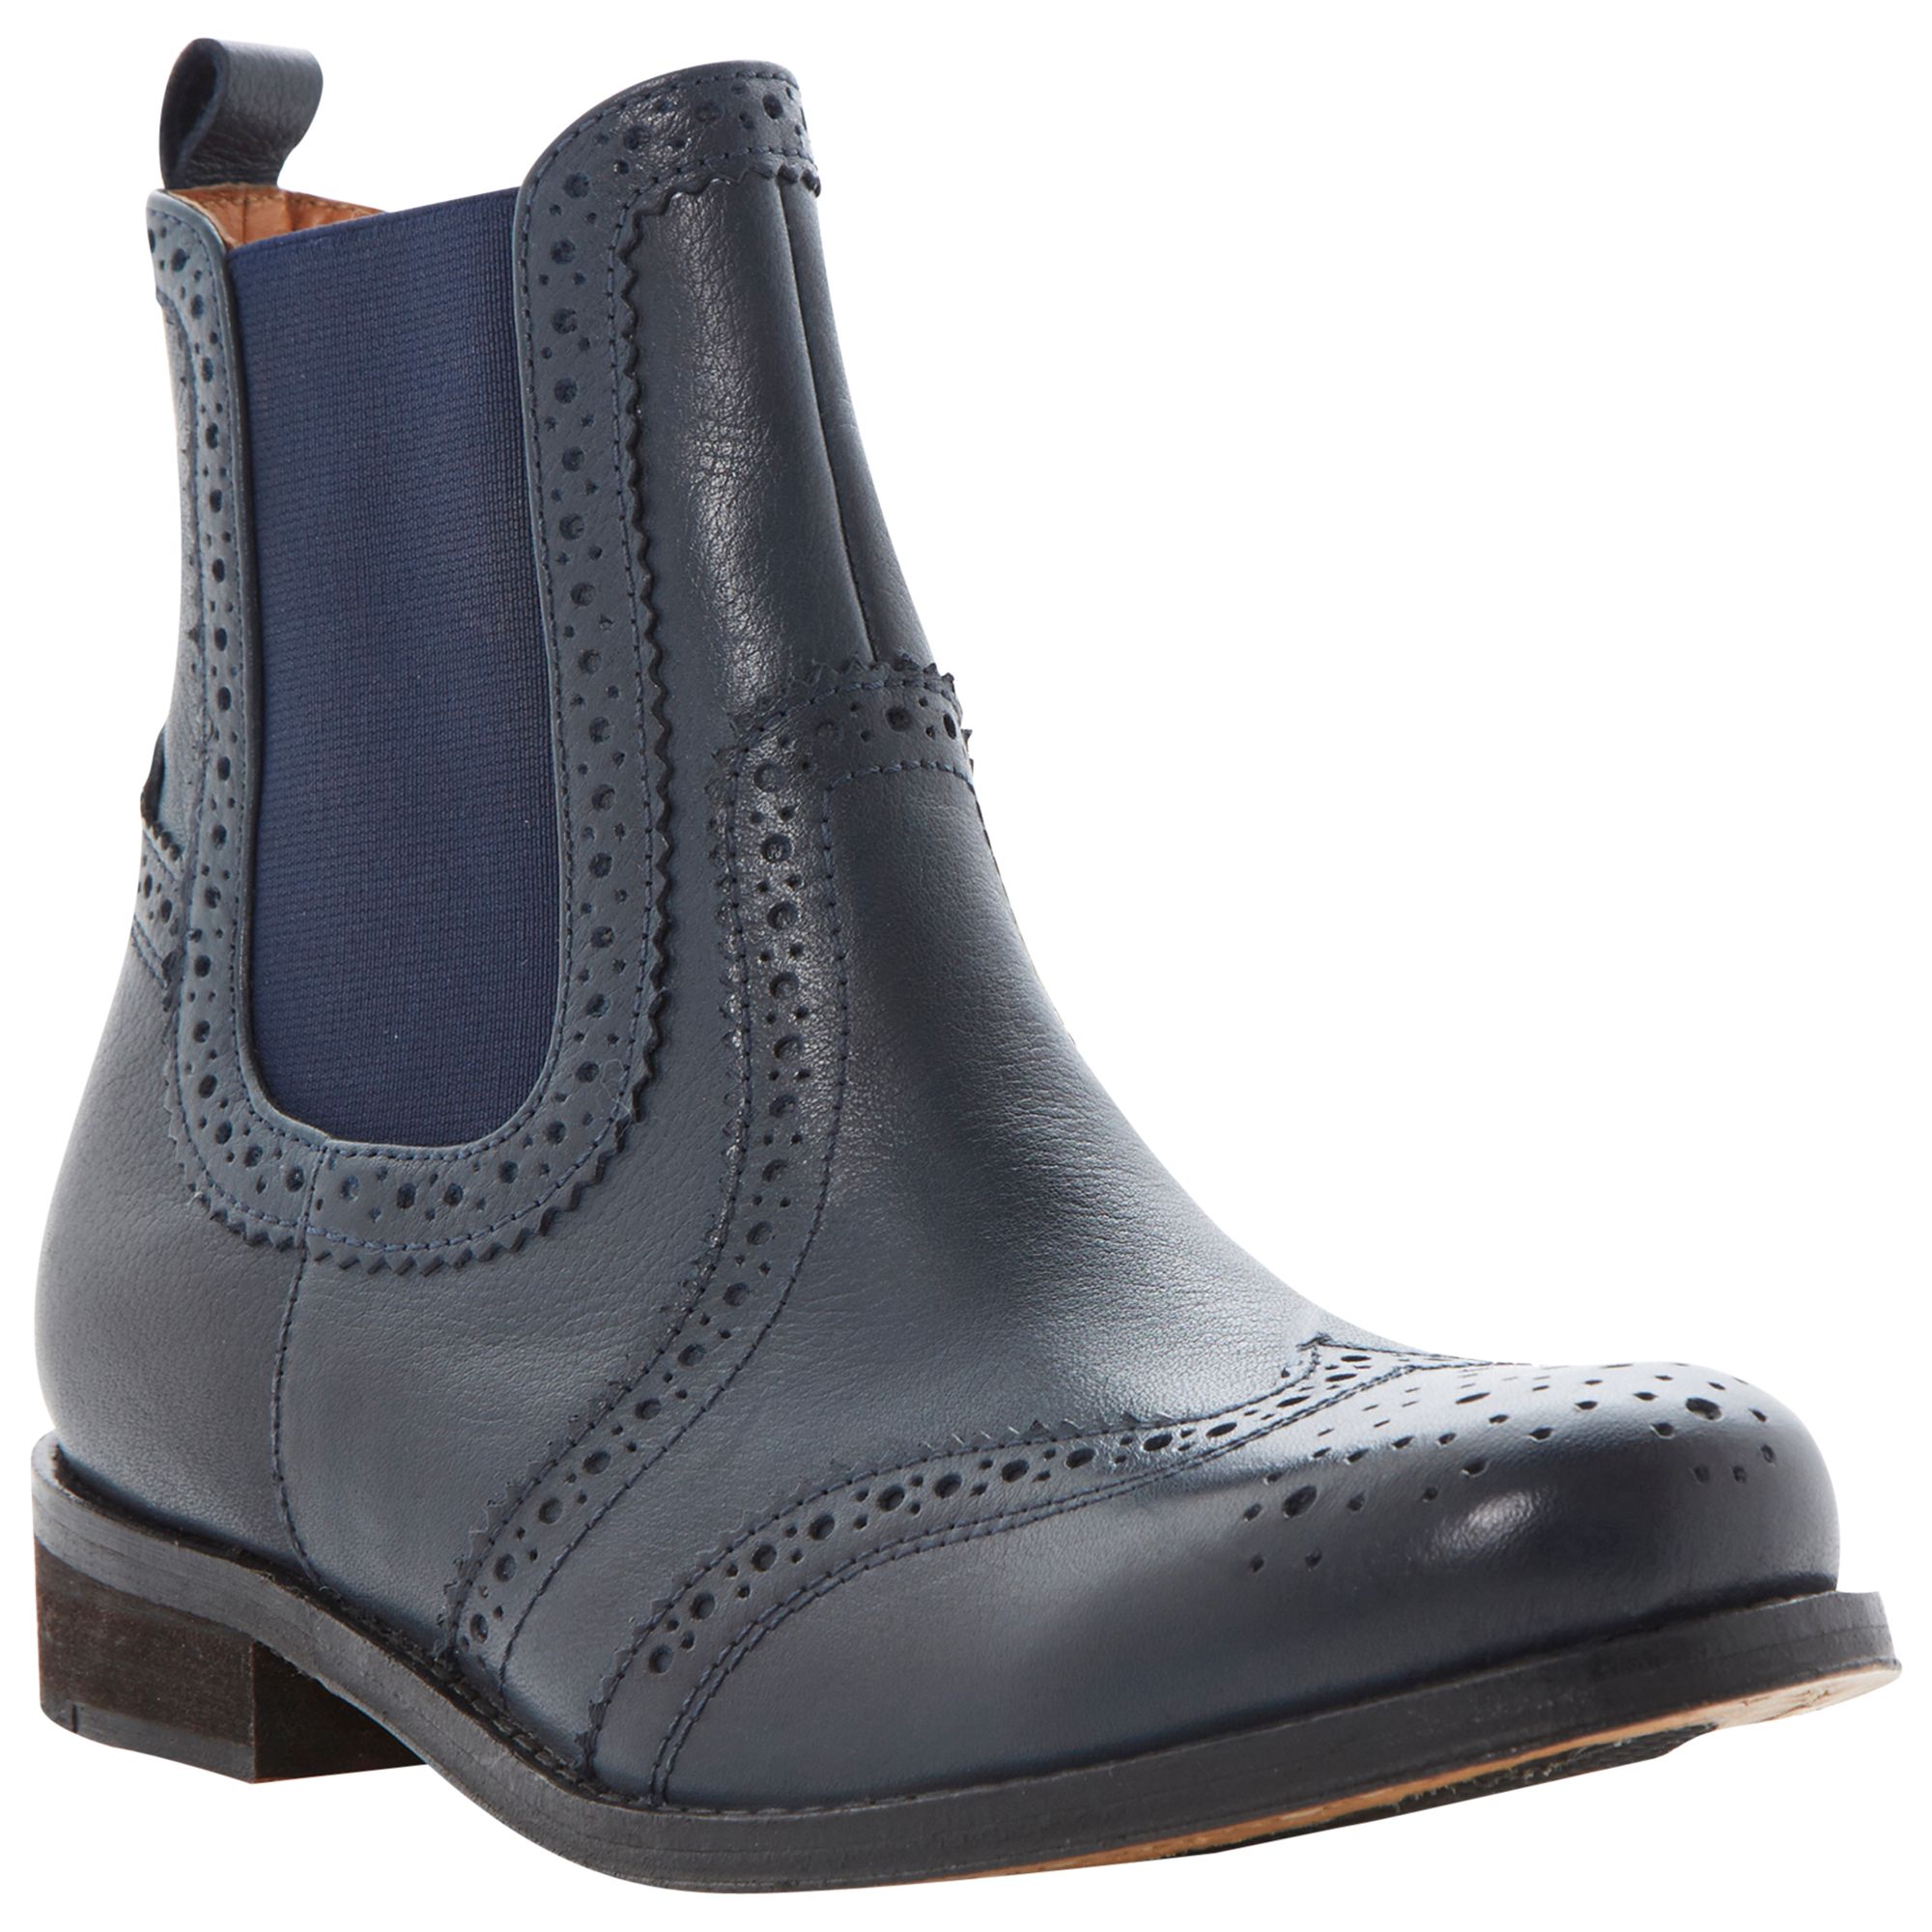 navy leather chelsea boots womens